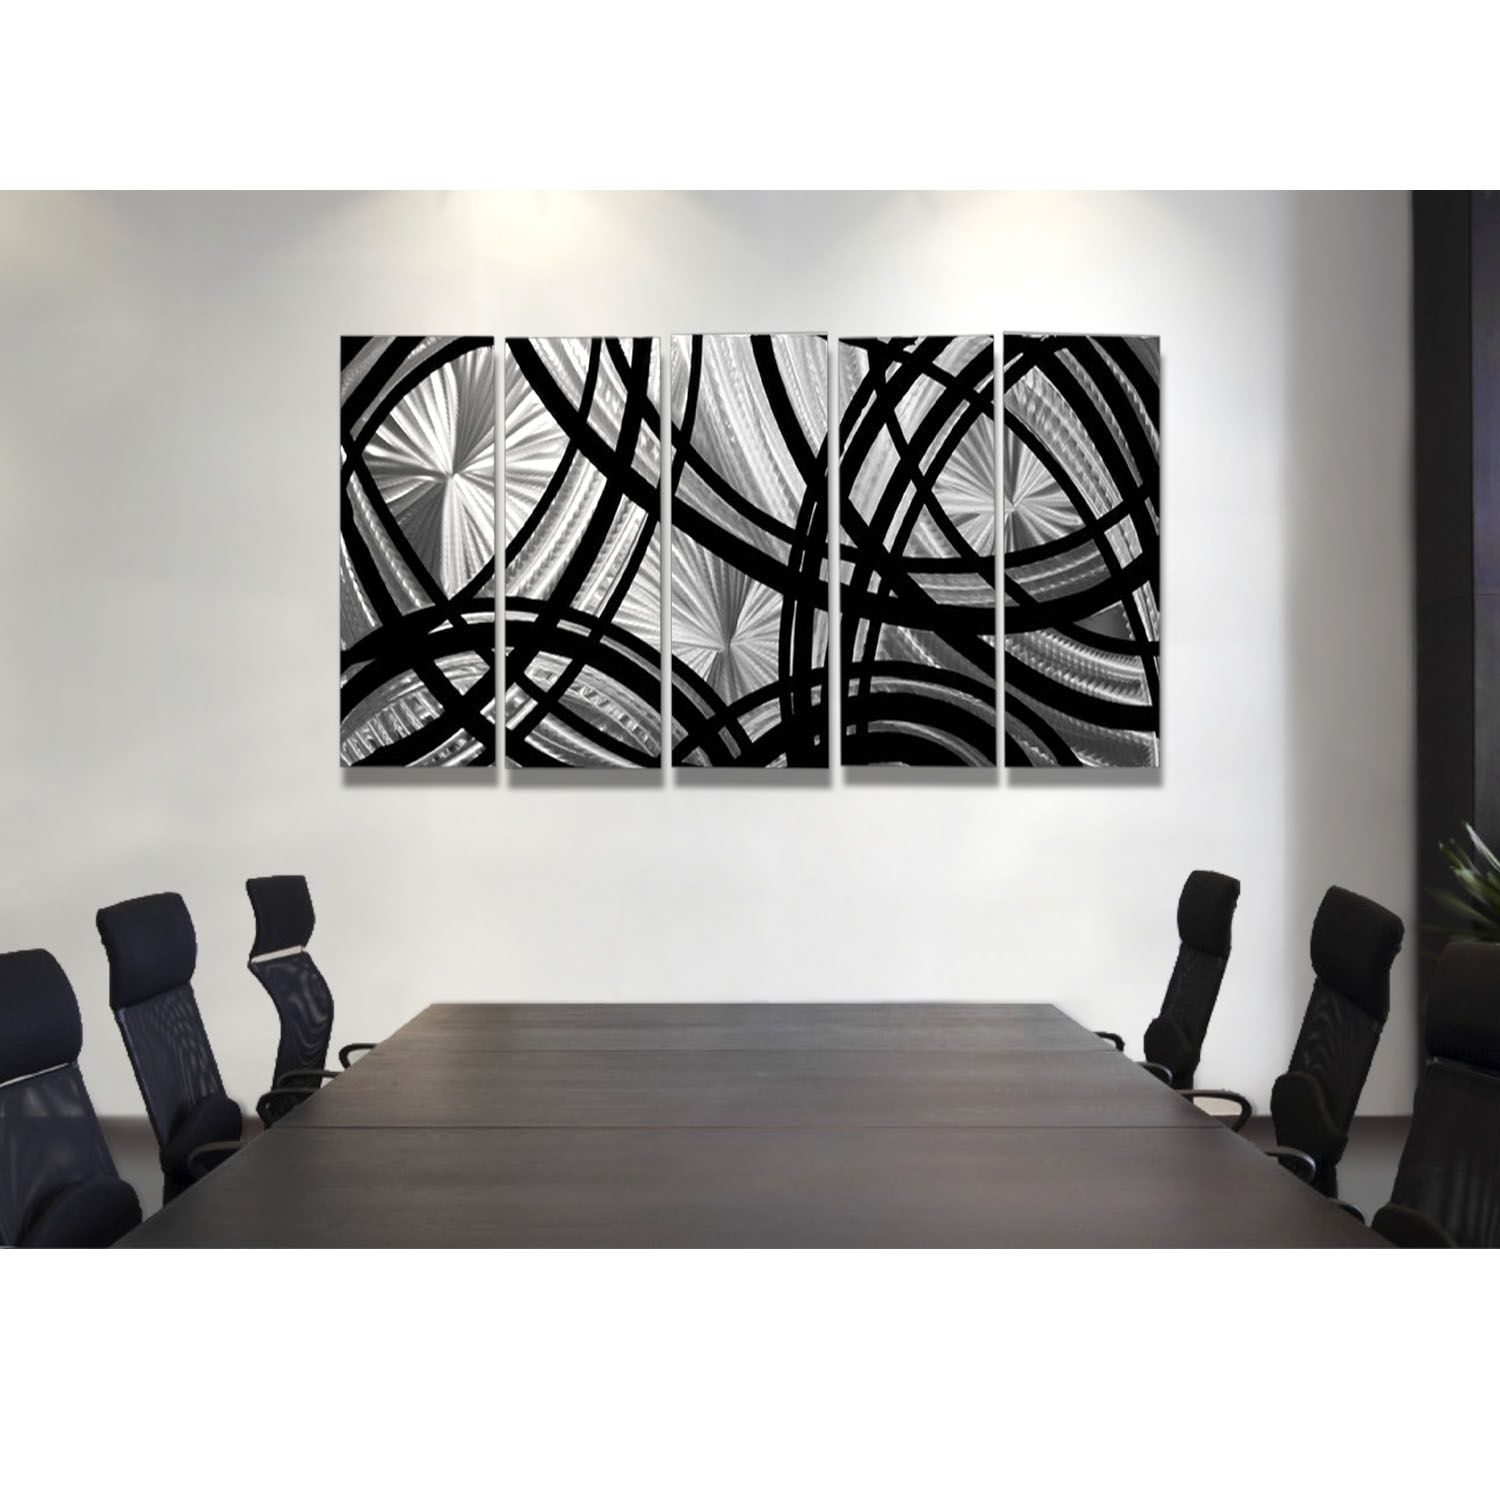 Frequency One – Black And Silver Metal Wall Art – 5 Panel Wall Décor In Black Metal Wall Art (View 7 of 20)